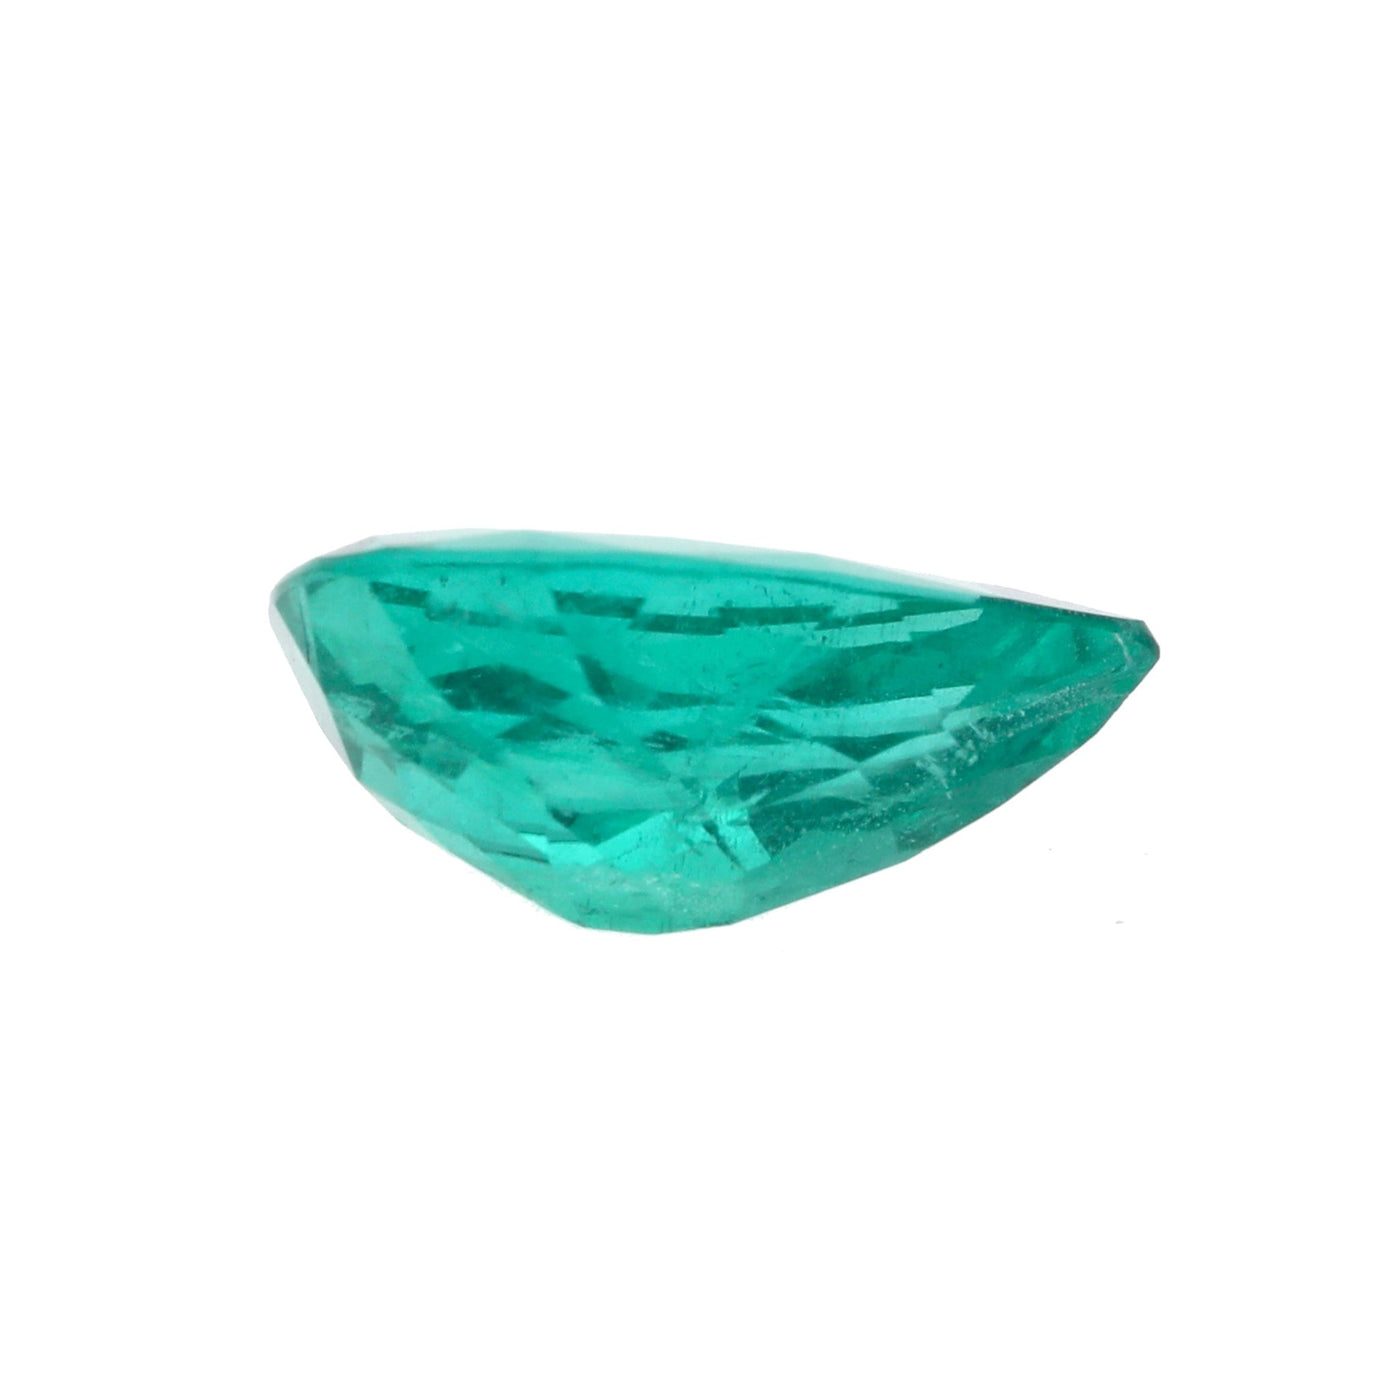 3.22CT Pear Shaped Emerald - Belmont Sparkle